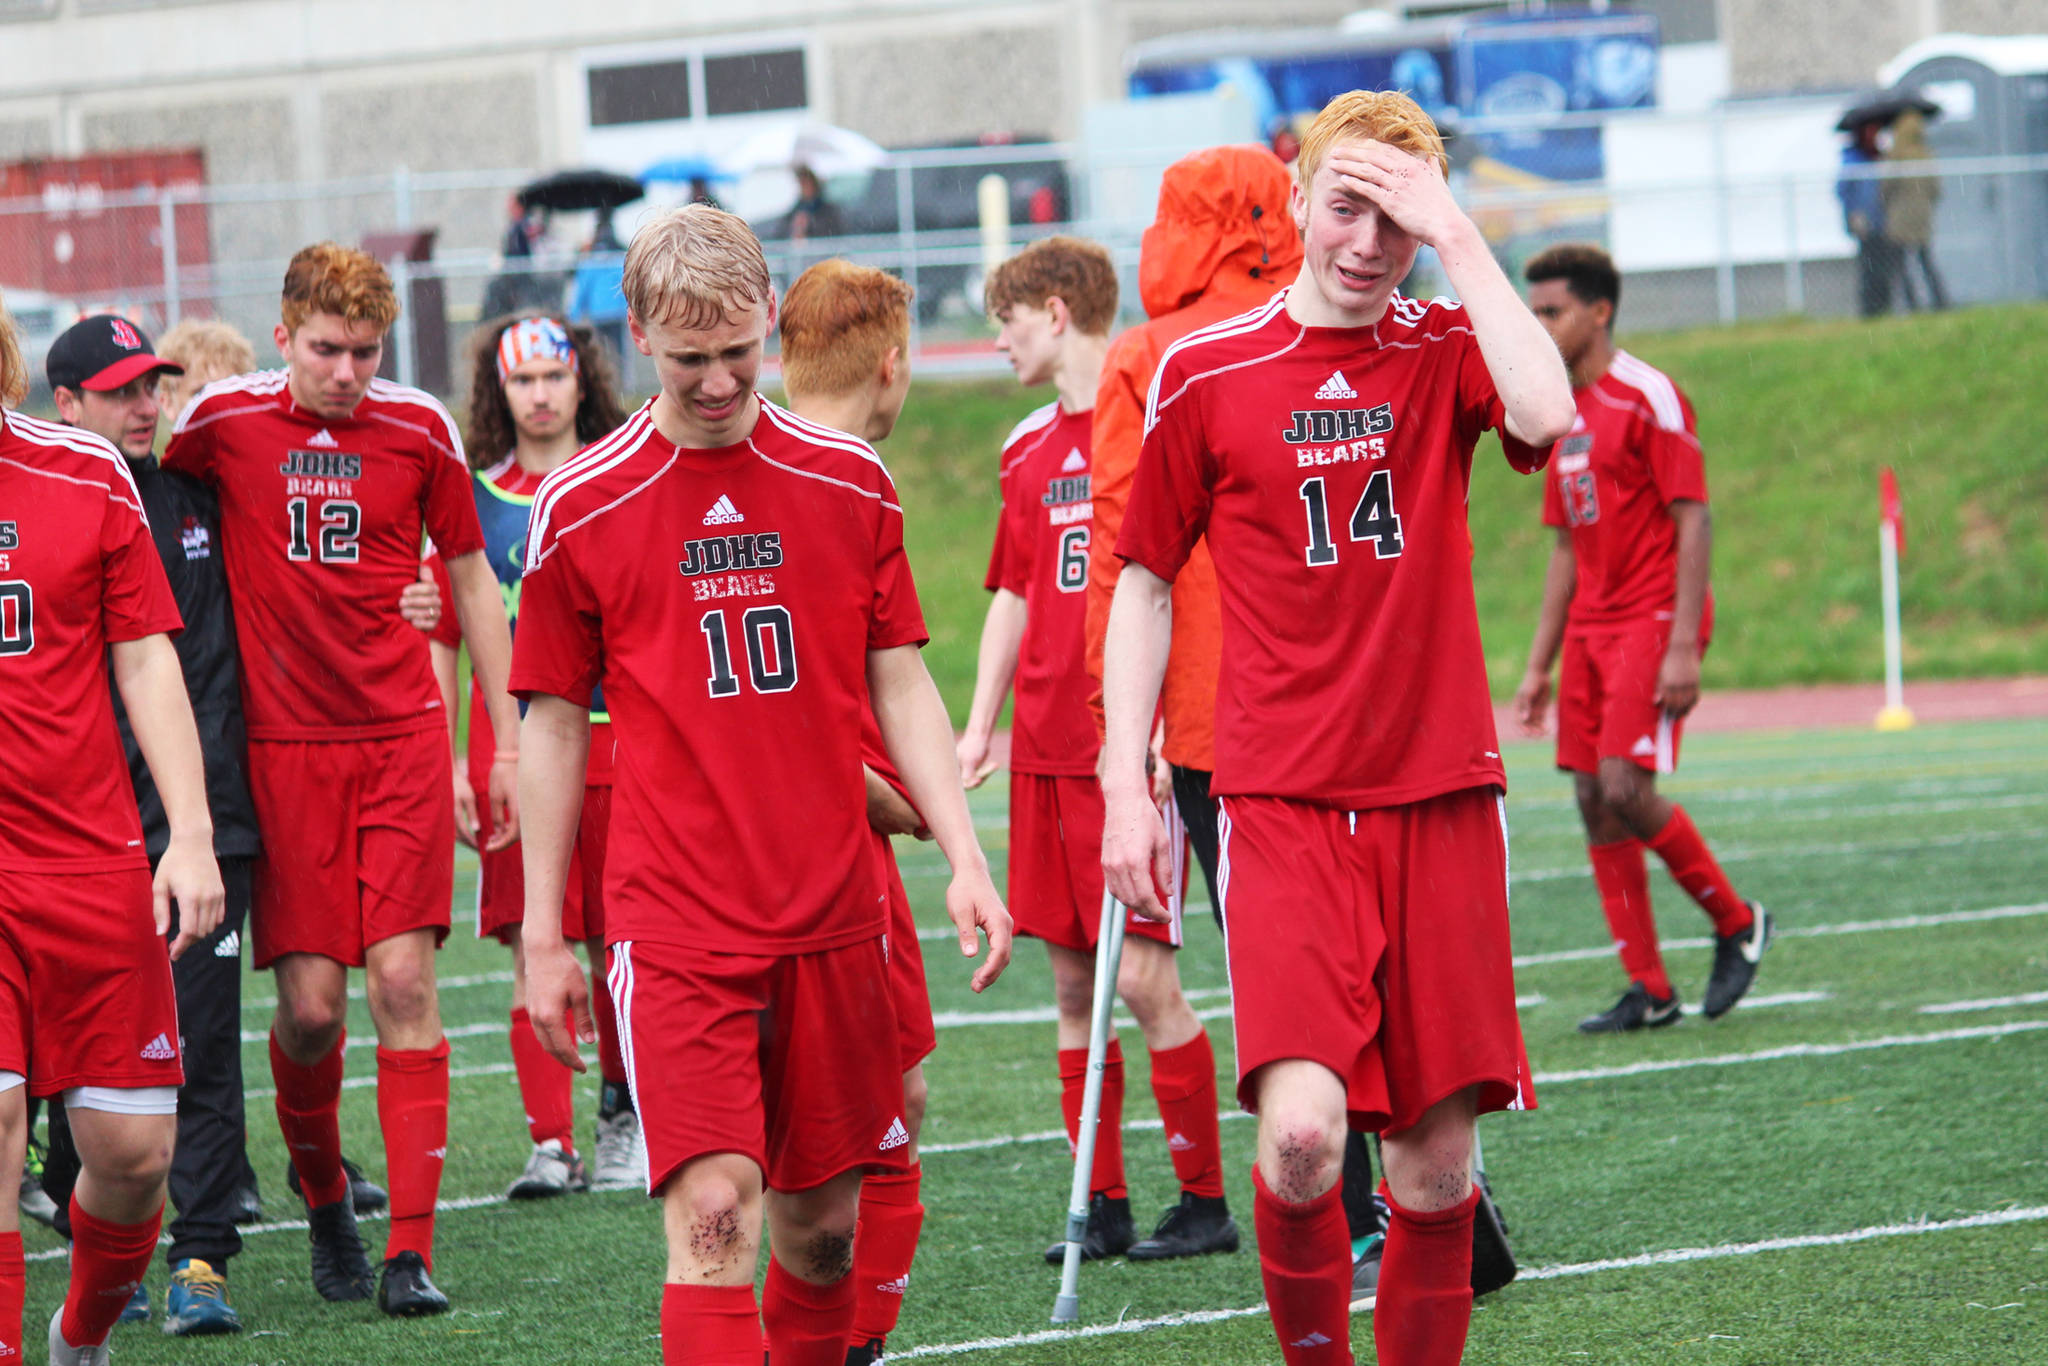 Members of the Juneau Douglas boys soccer team walk off the field in tears after a 3-2 loss to Kenai in the championship game of the Division II state soccer tournament Saturday. May 25, 2019 at Service High School in Anchorage, Alaska. The game went into three halves of overtime before it was over. (Photo by Megan Pacer/Homer News)